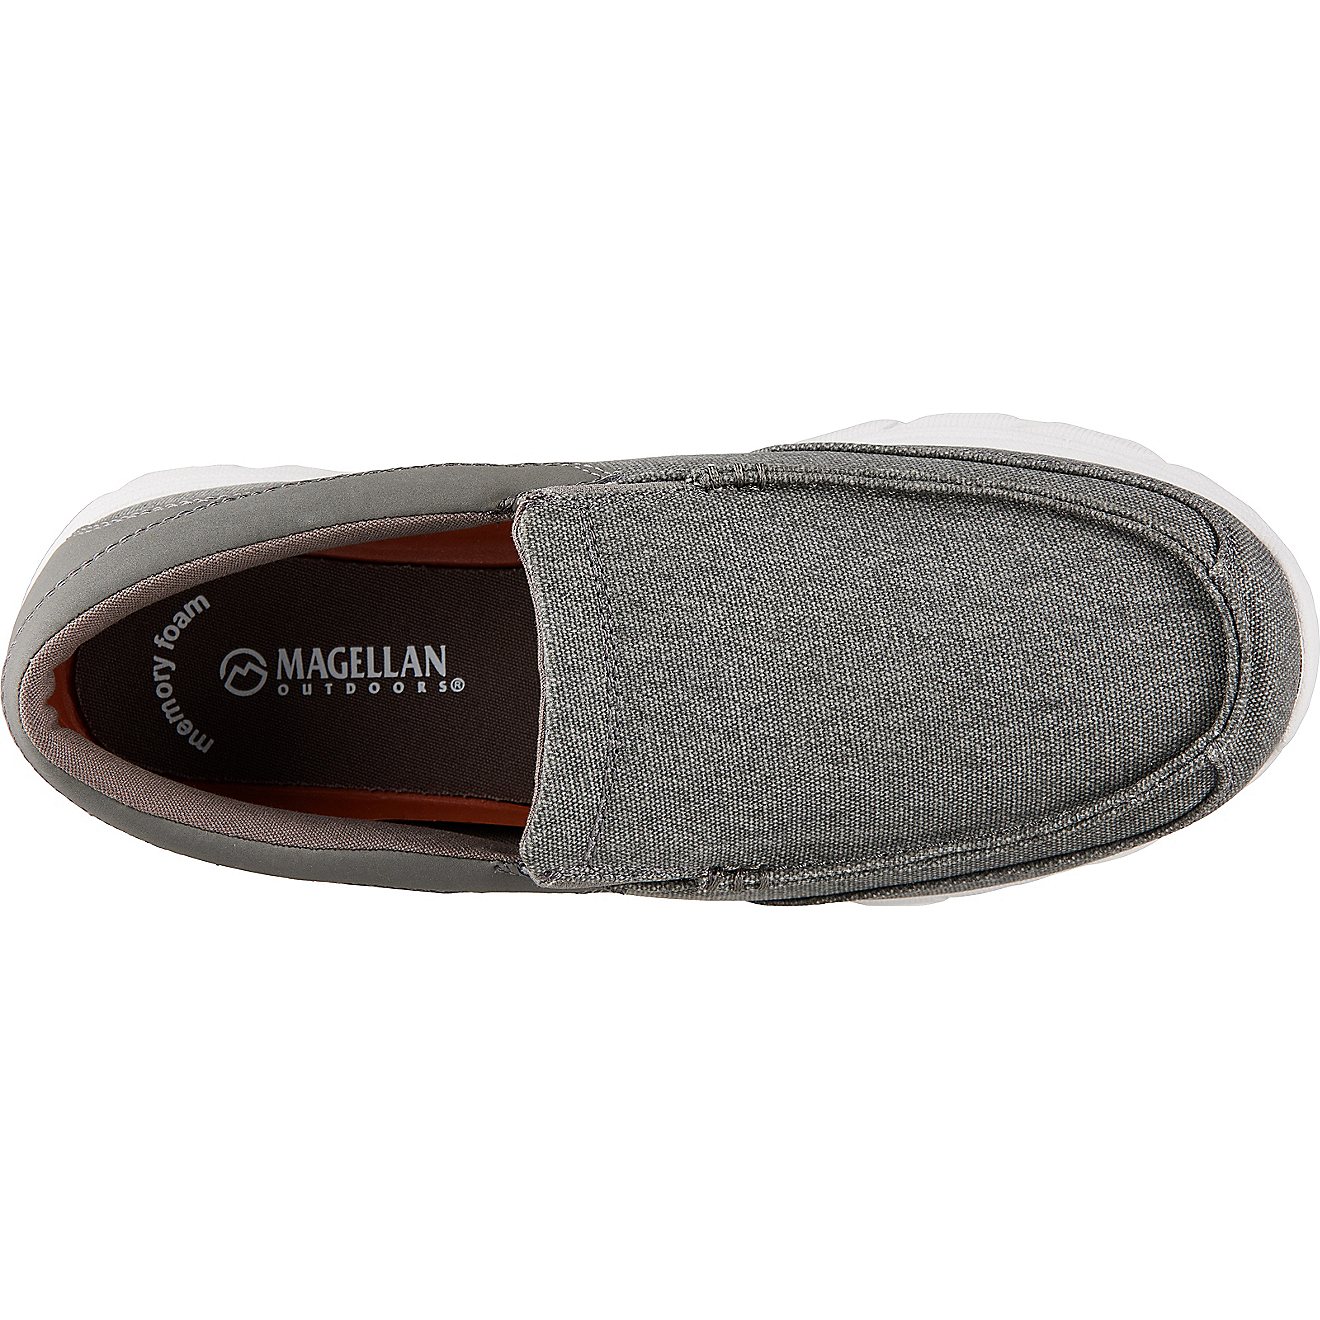 Magellan Outdoors Men's Clive Canvas Shoes                                                                                       - view number 3